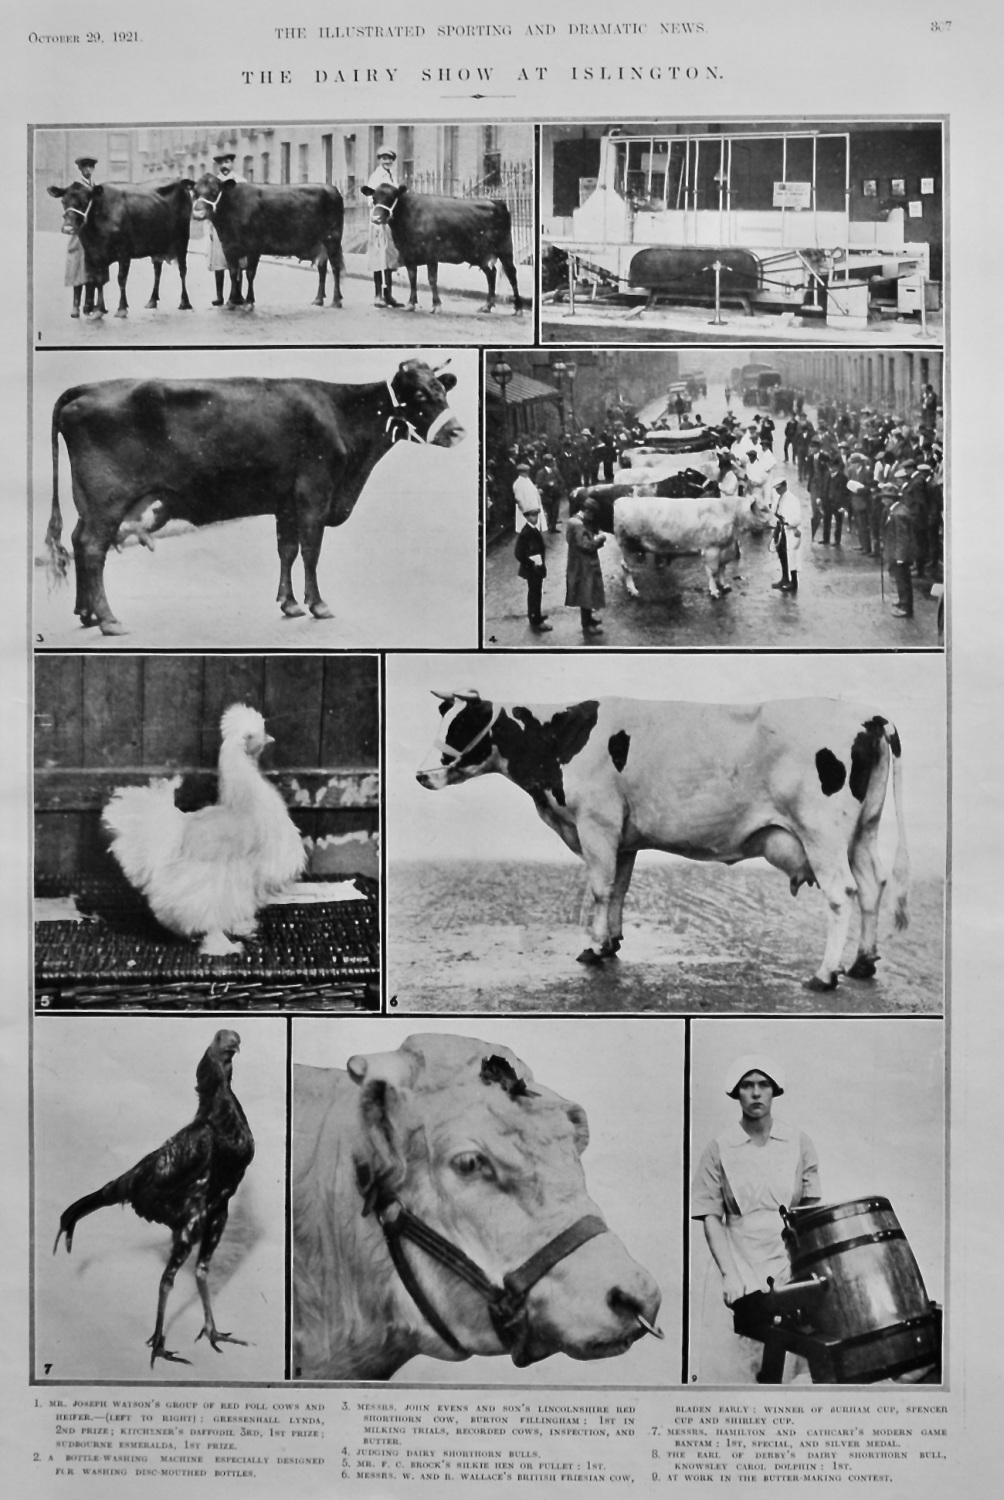 The Dairy Show at Islington.  1921.